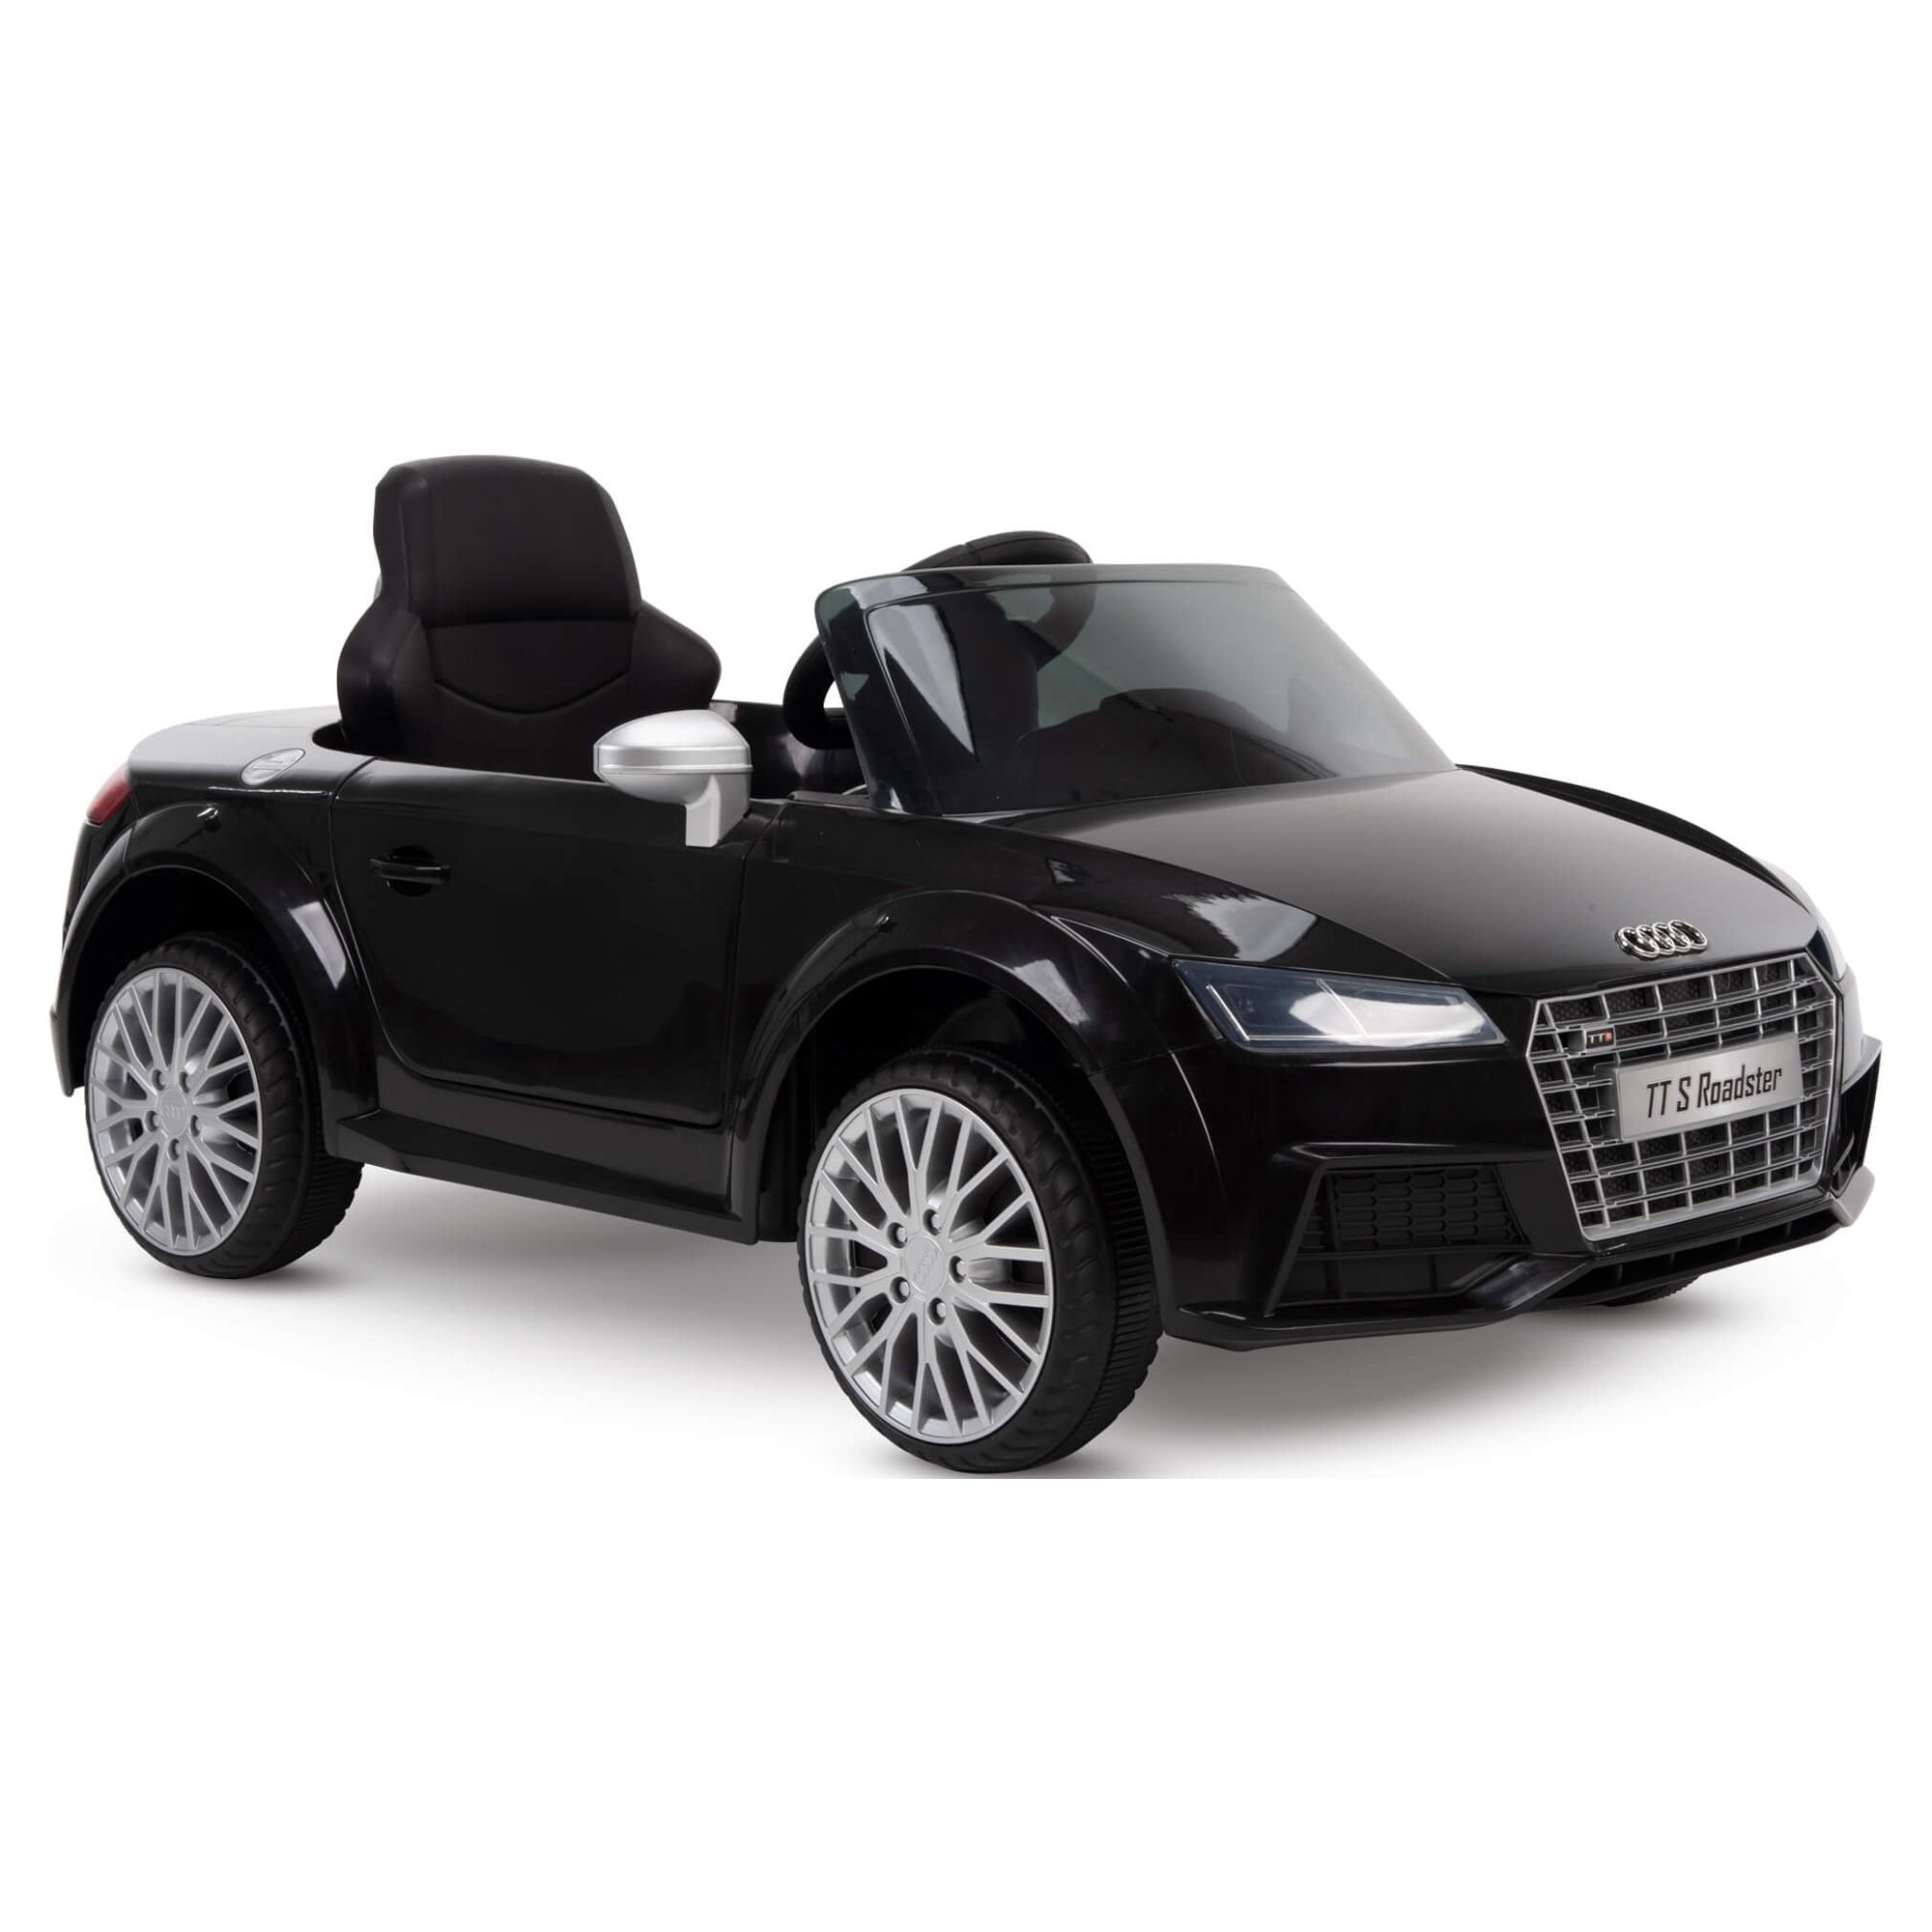 12 Volts Audi Electric Battery-Powered Ride-on Car, for Children ages 3+ Years, Black, by Huffy - image 1 of 6